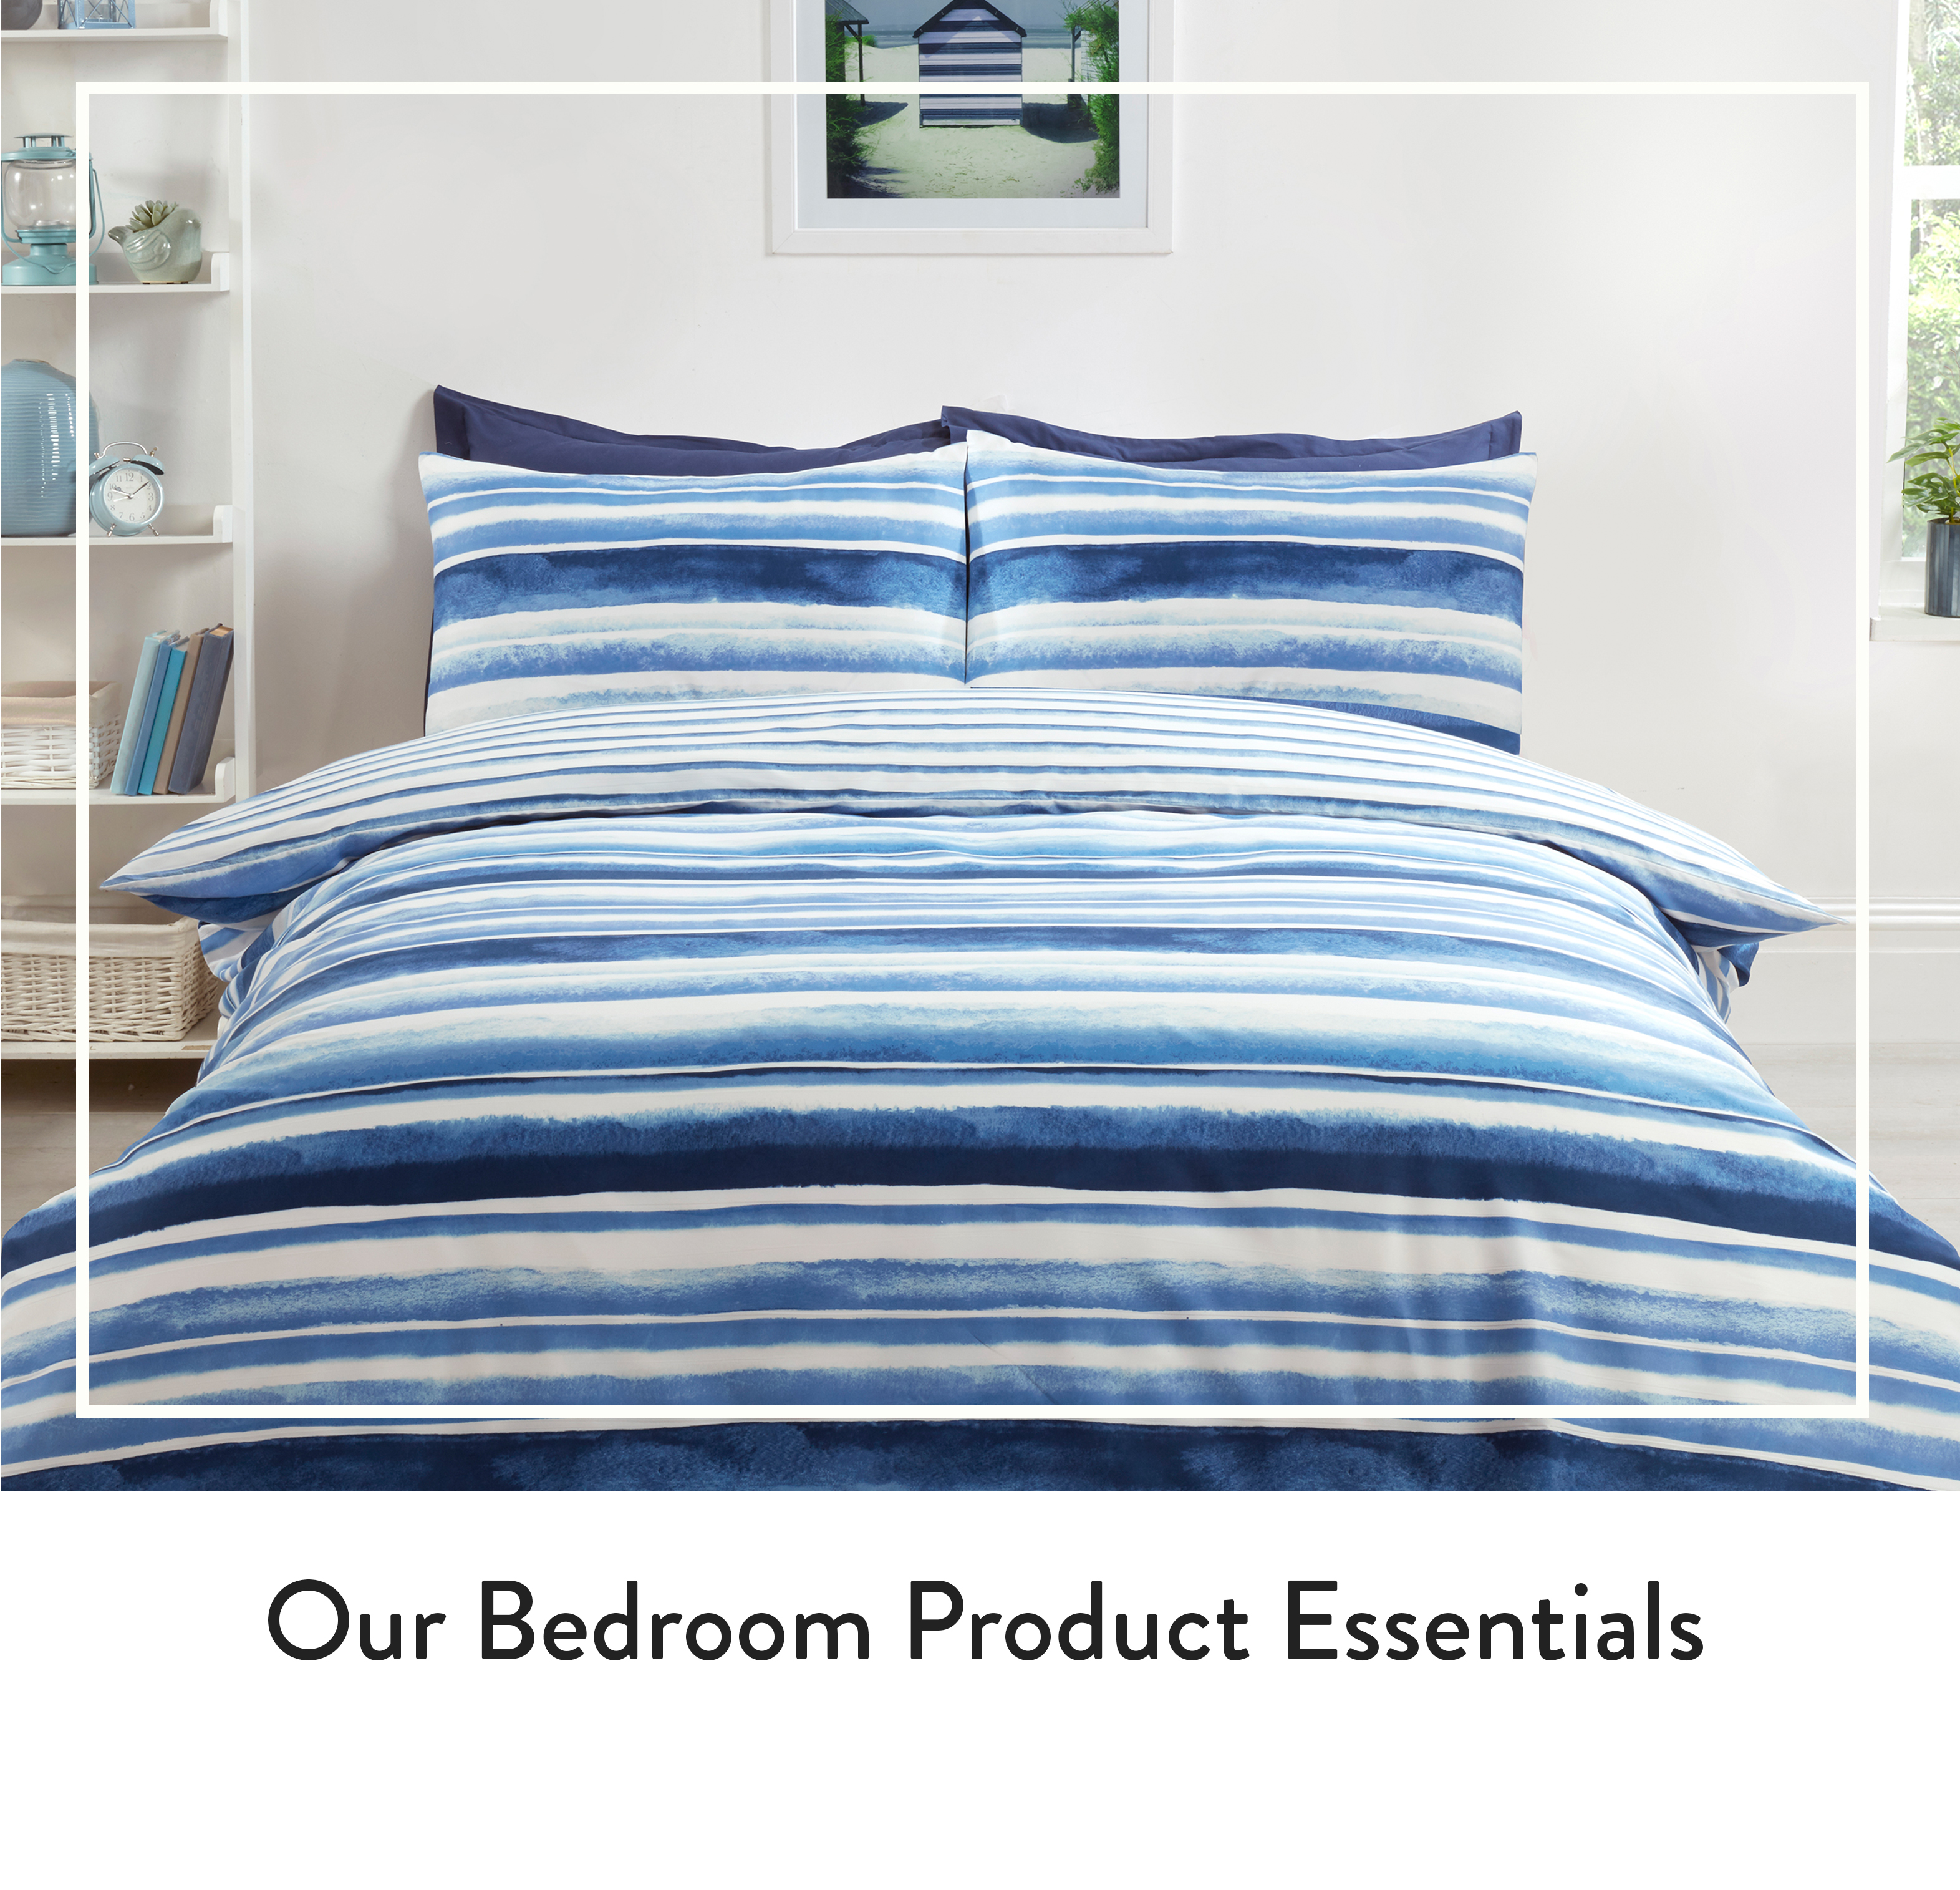 Our Bedroom Product Essentials